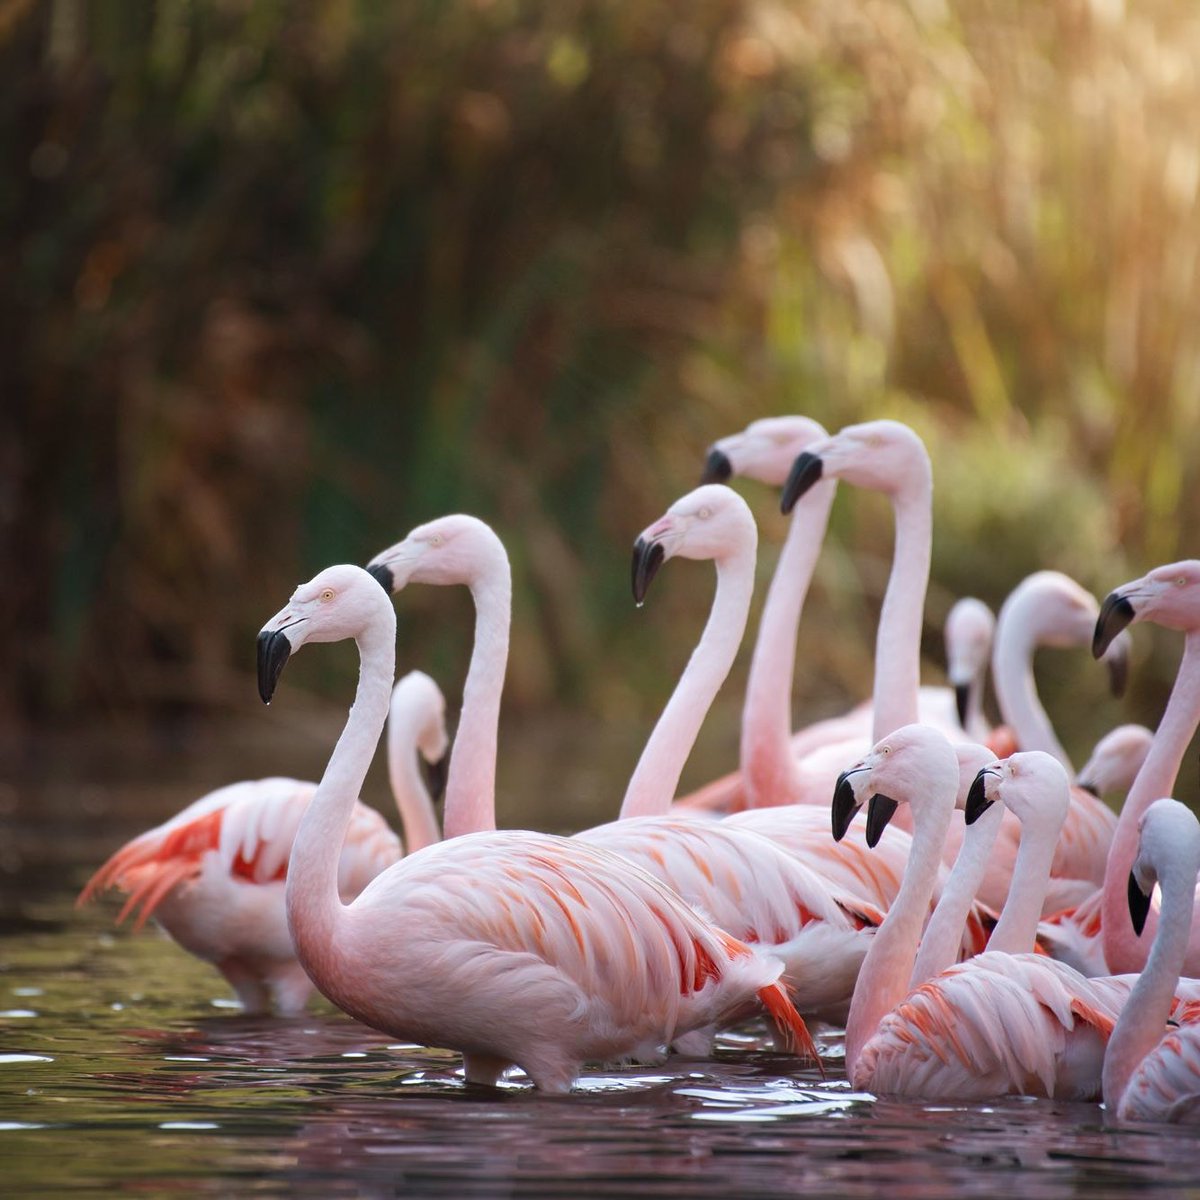 🦩 How can you tell the age of a flamingo? 🦩 

🪶 Take a look at the feathers on their necks. If the feathers are light grey, they are youngsters, as flamingos are born grey and fluffy. 

#InternationalFlamingoDay